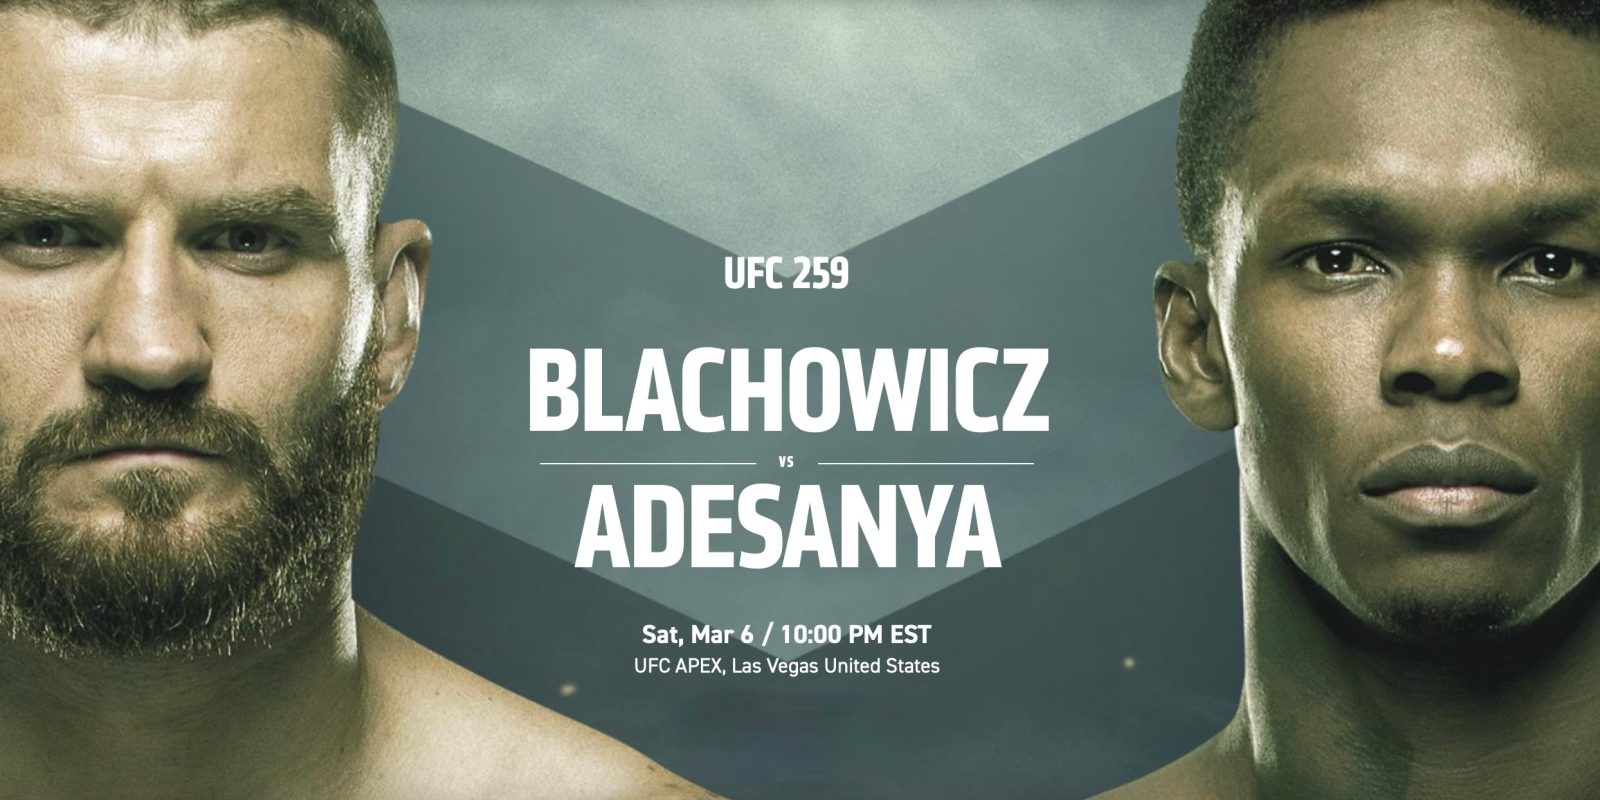 How to watch UFC 259 Blachowicz vs Adesanya on web, iPhone, Apple TV, more